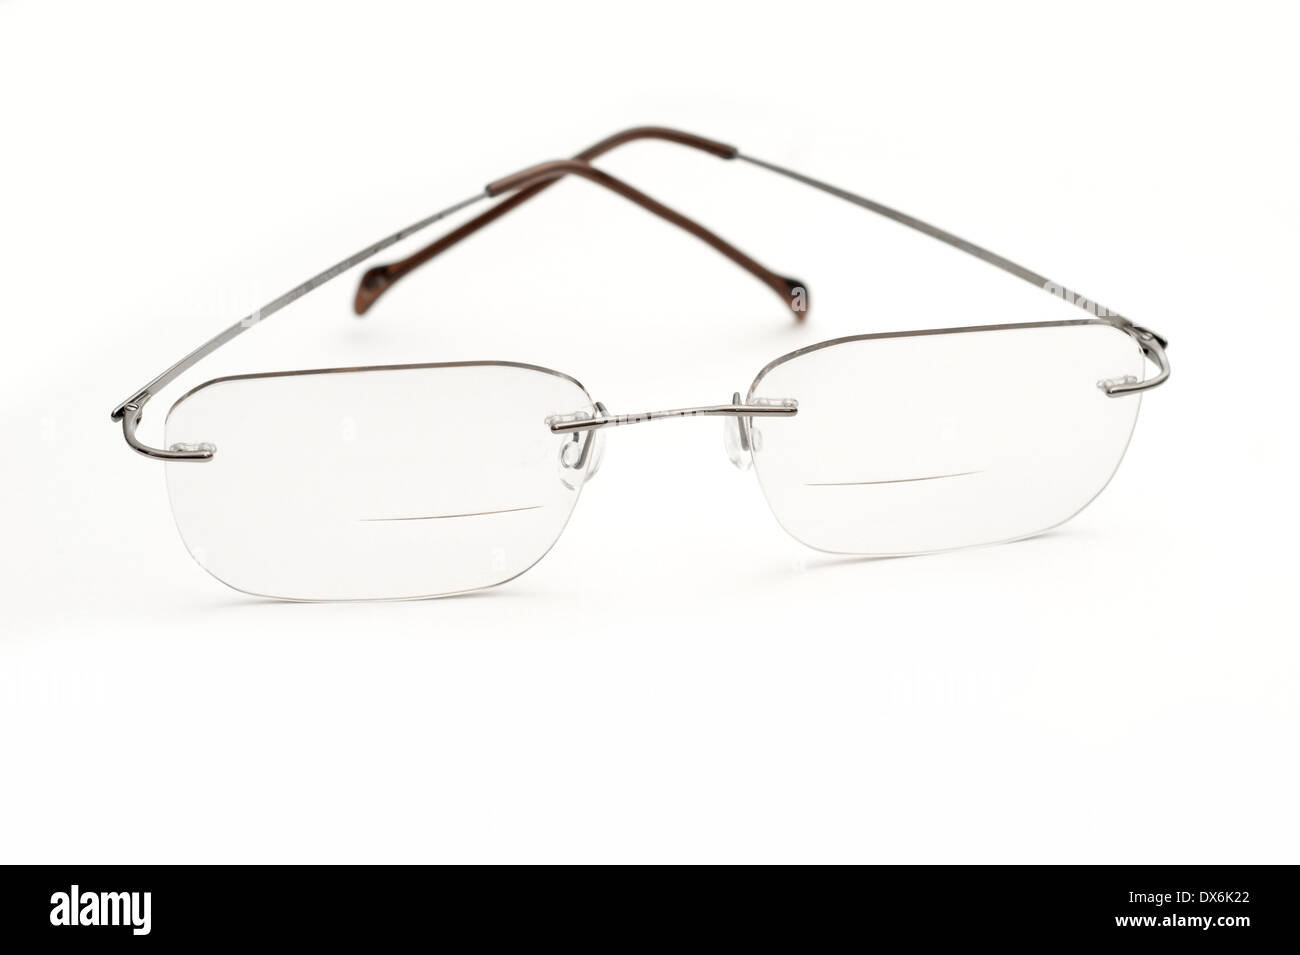 Bifocal glasses (spectacles) with transition lens for reading close work & long distance sight Stock Photo